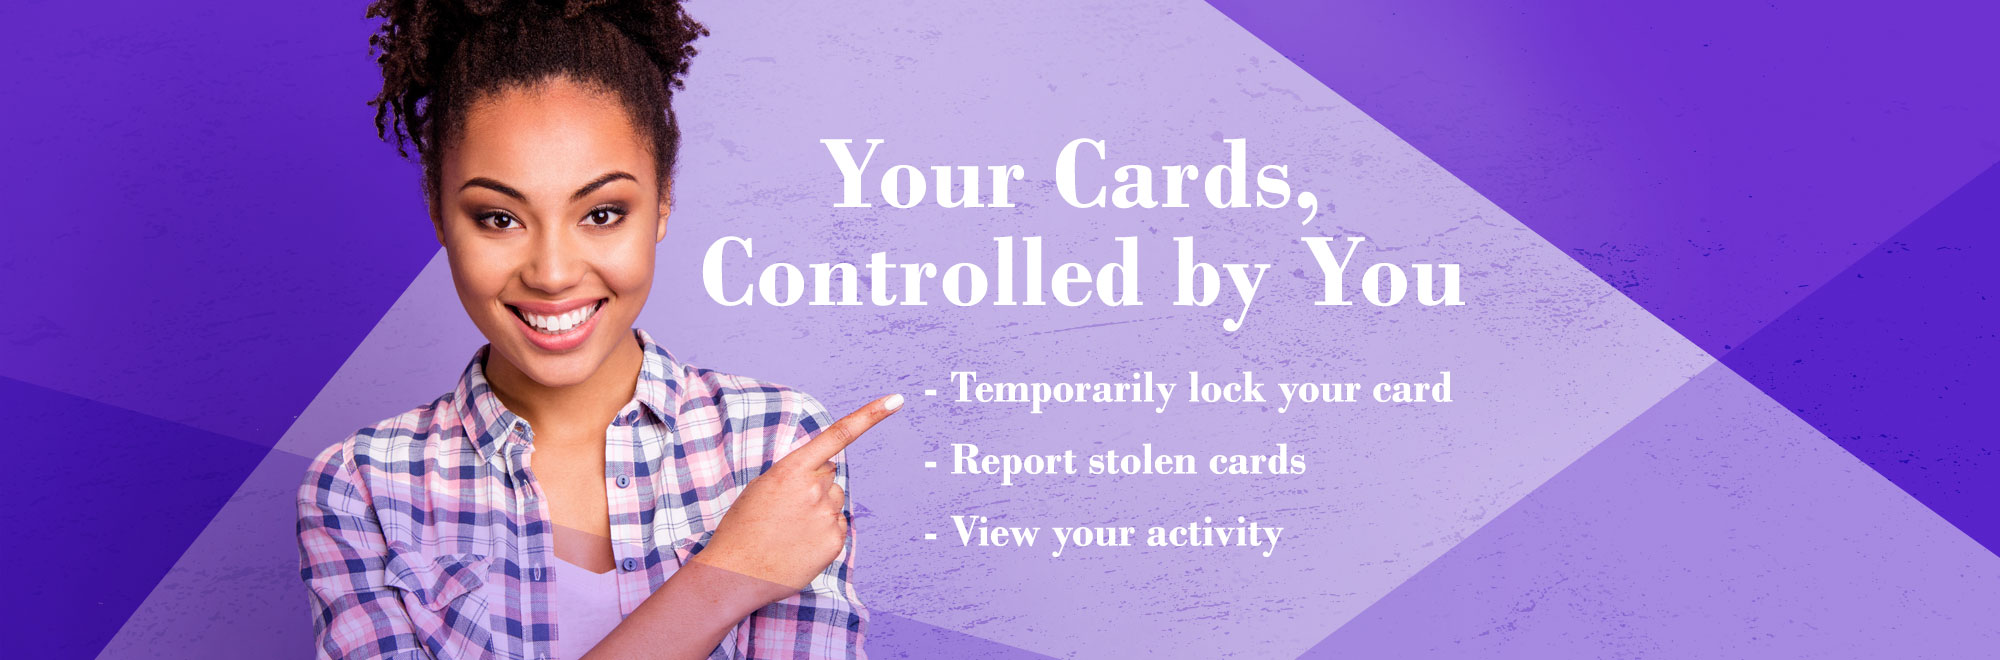 Your cards controlled by you. temporarily lock your cards, report stolen card, and view your activity. 